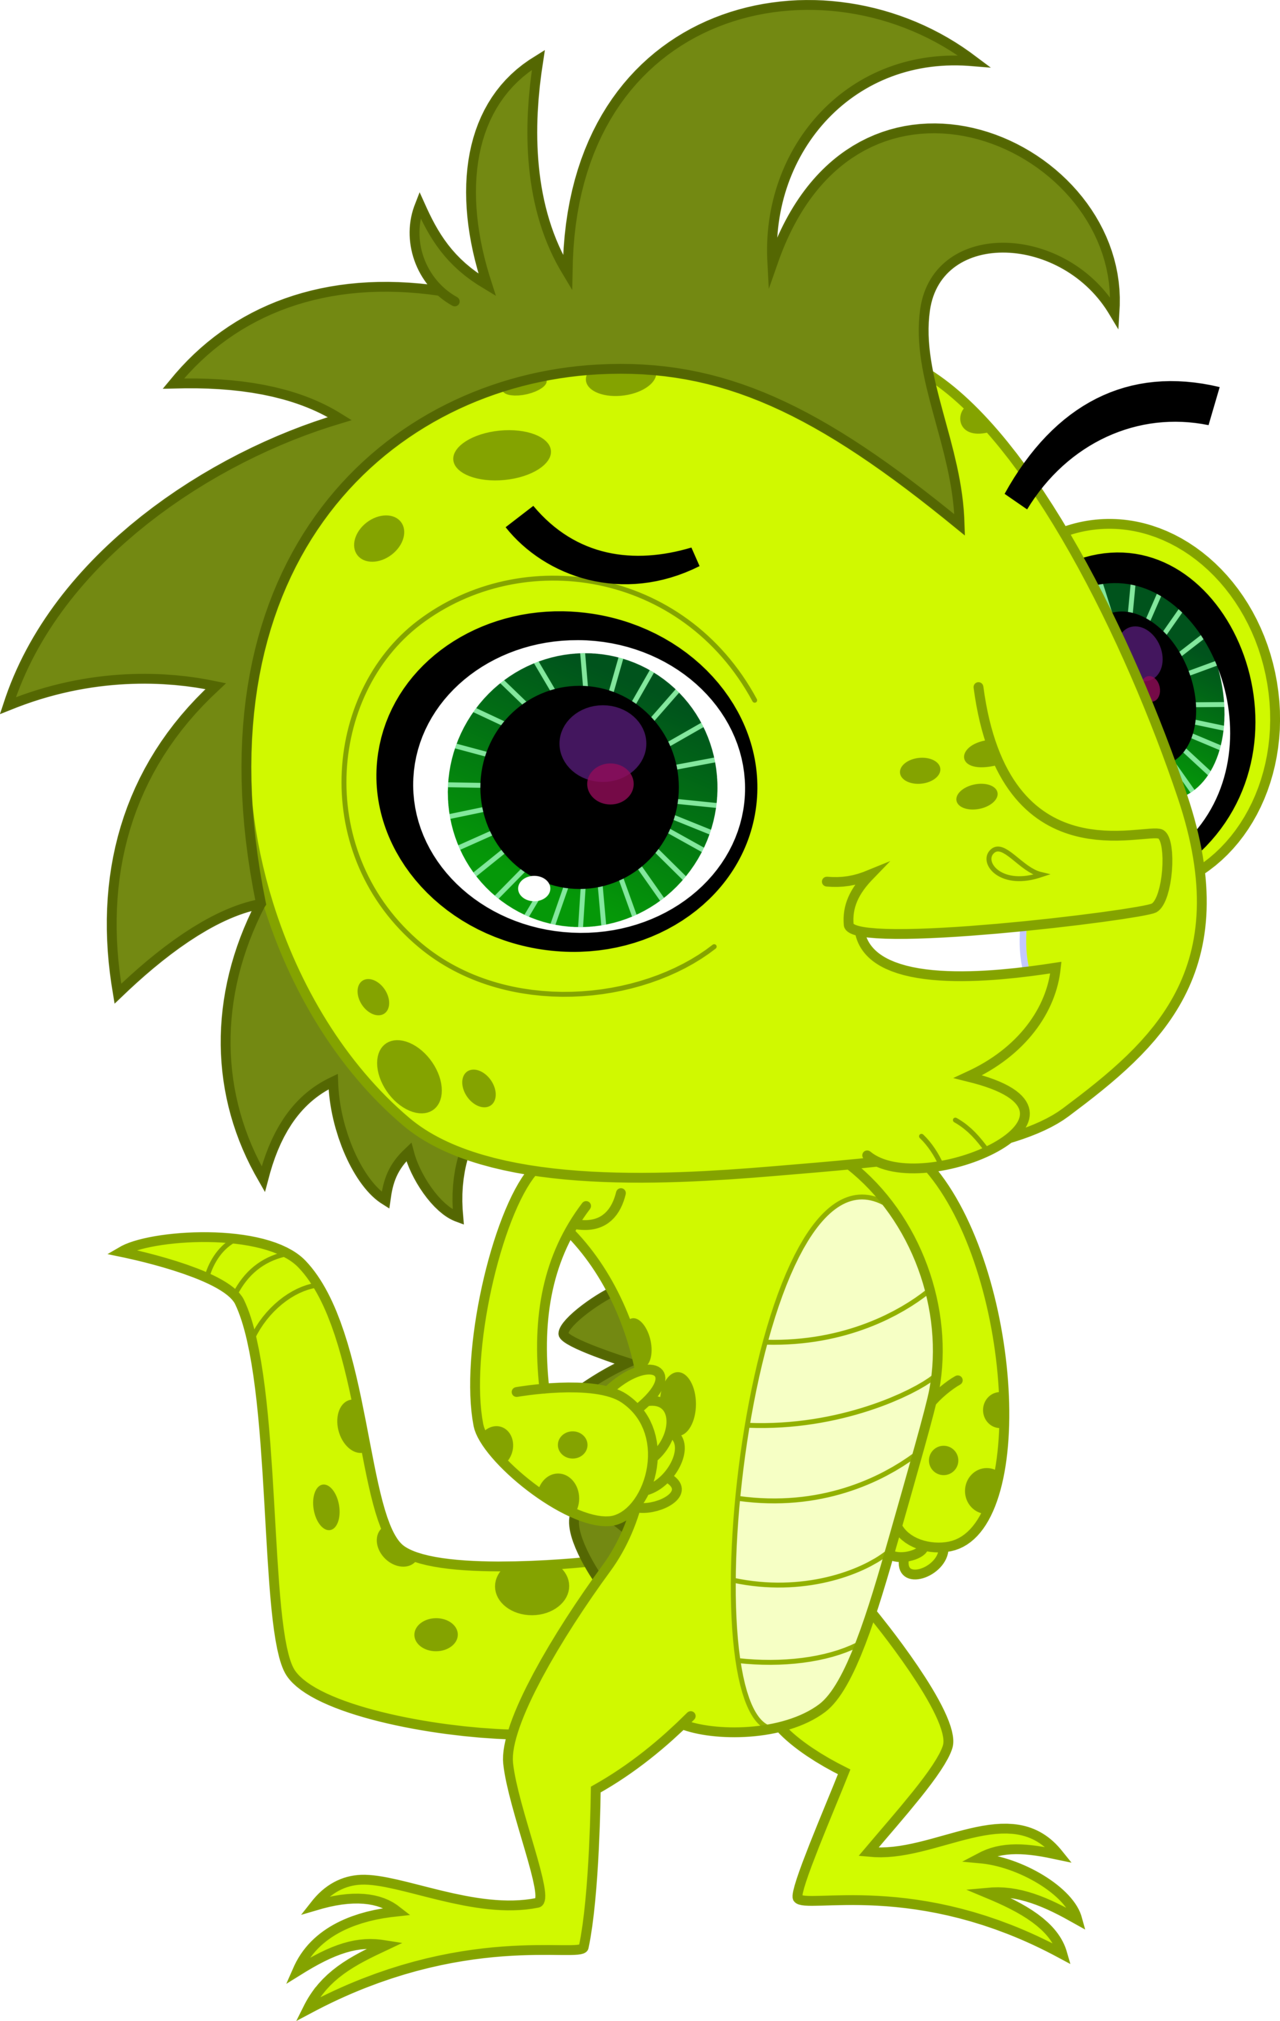 Iguana clipart baby. Image bruce the by